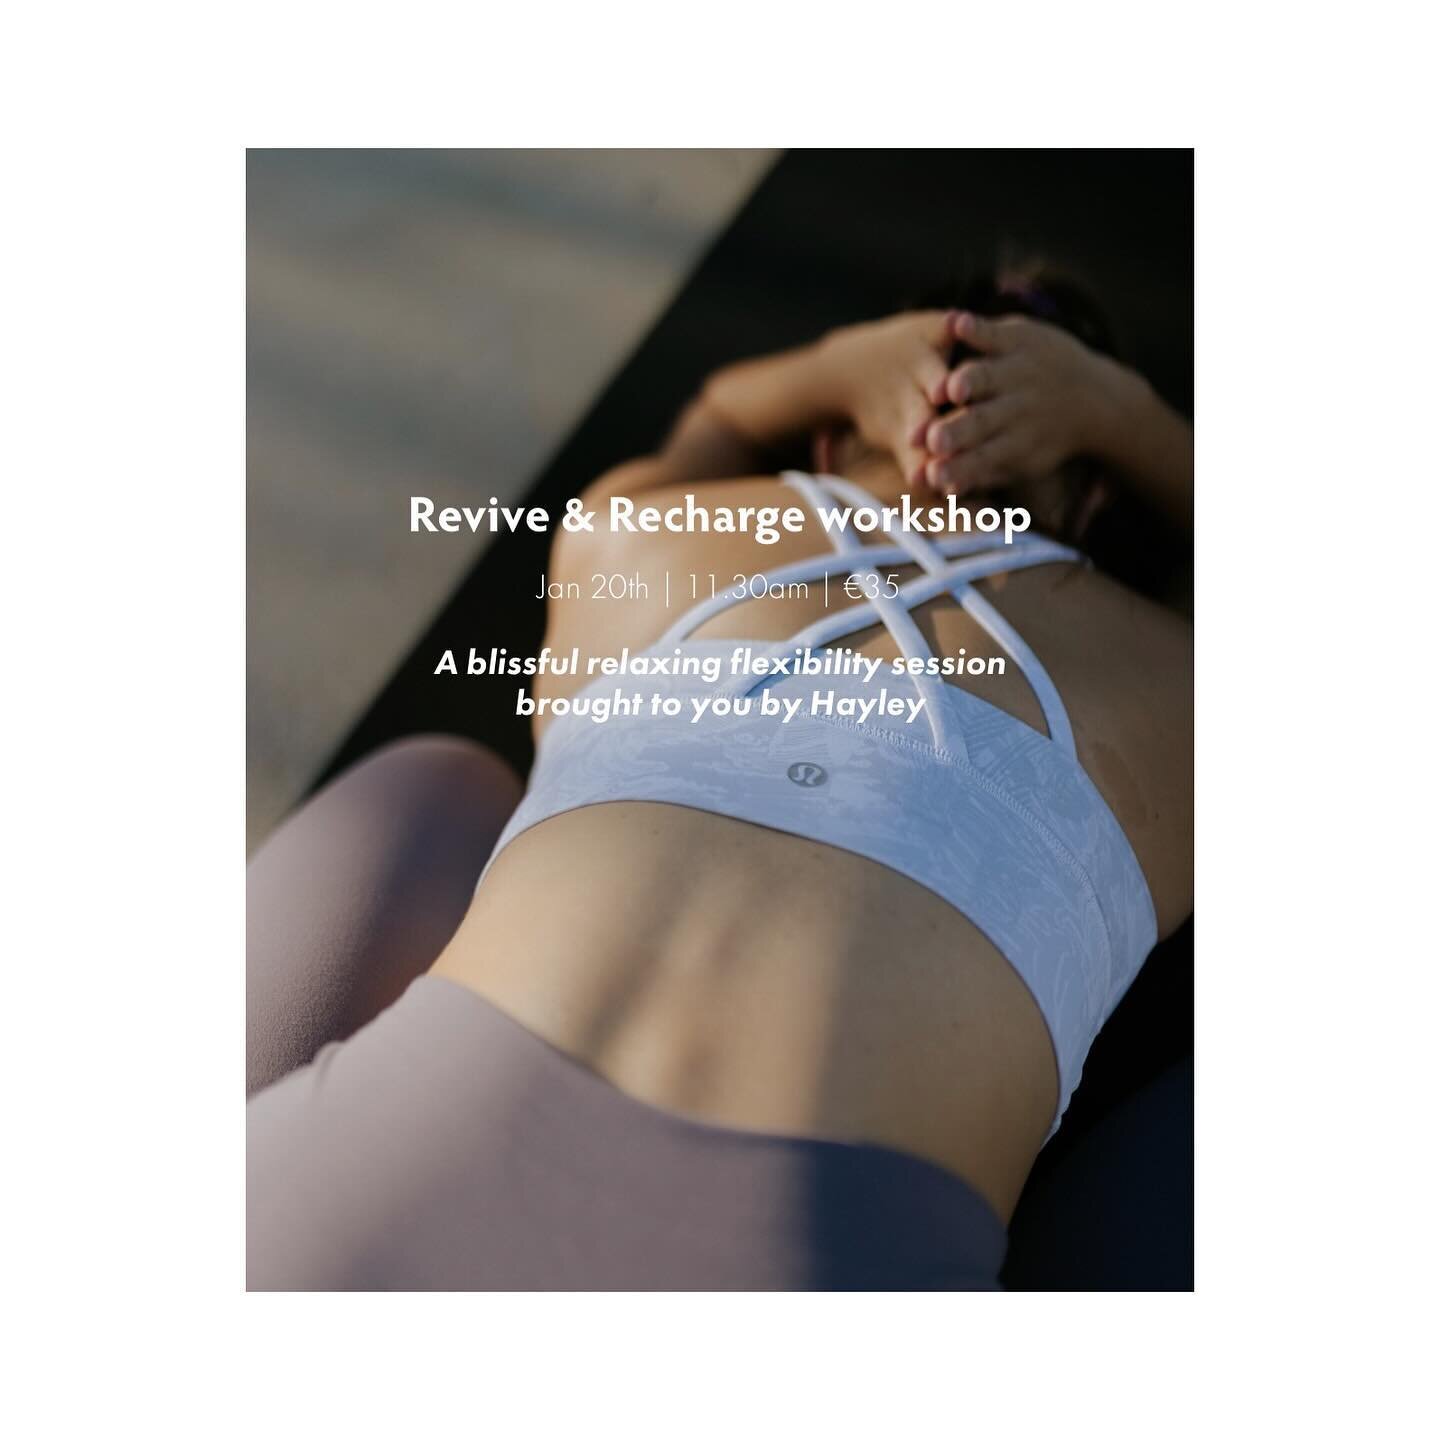 2024 workshop 💫 
A blissful relaxing flexibility session brought to you by Hayley. With a mix of Yoga and gentle Pilates this session is suitable for everyone including complete beginners.
In this workshop you will move slowly with freedom and fluid